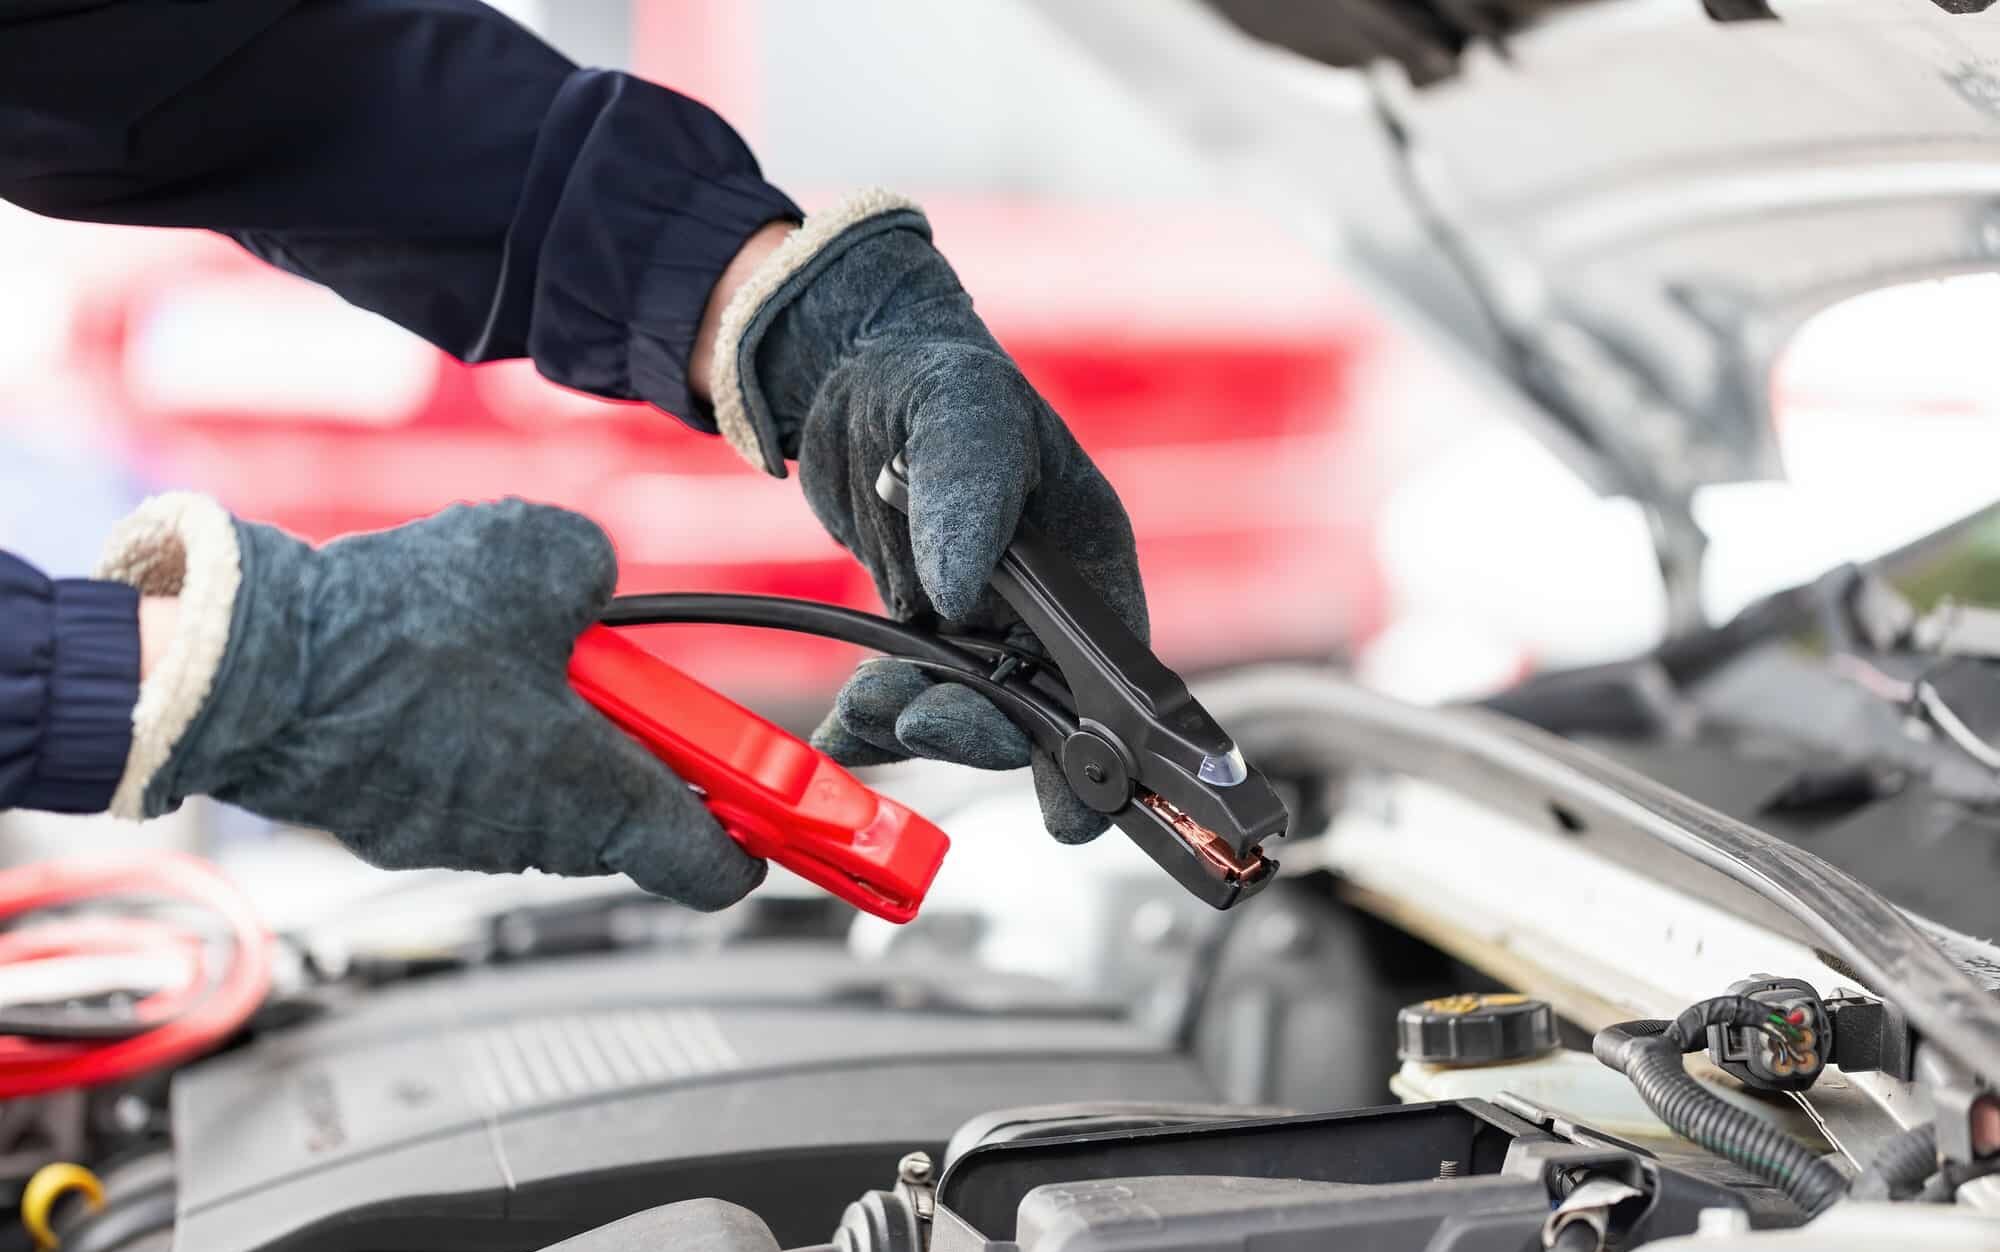 Human trying to start engine with jumper cables in close up